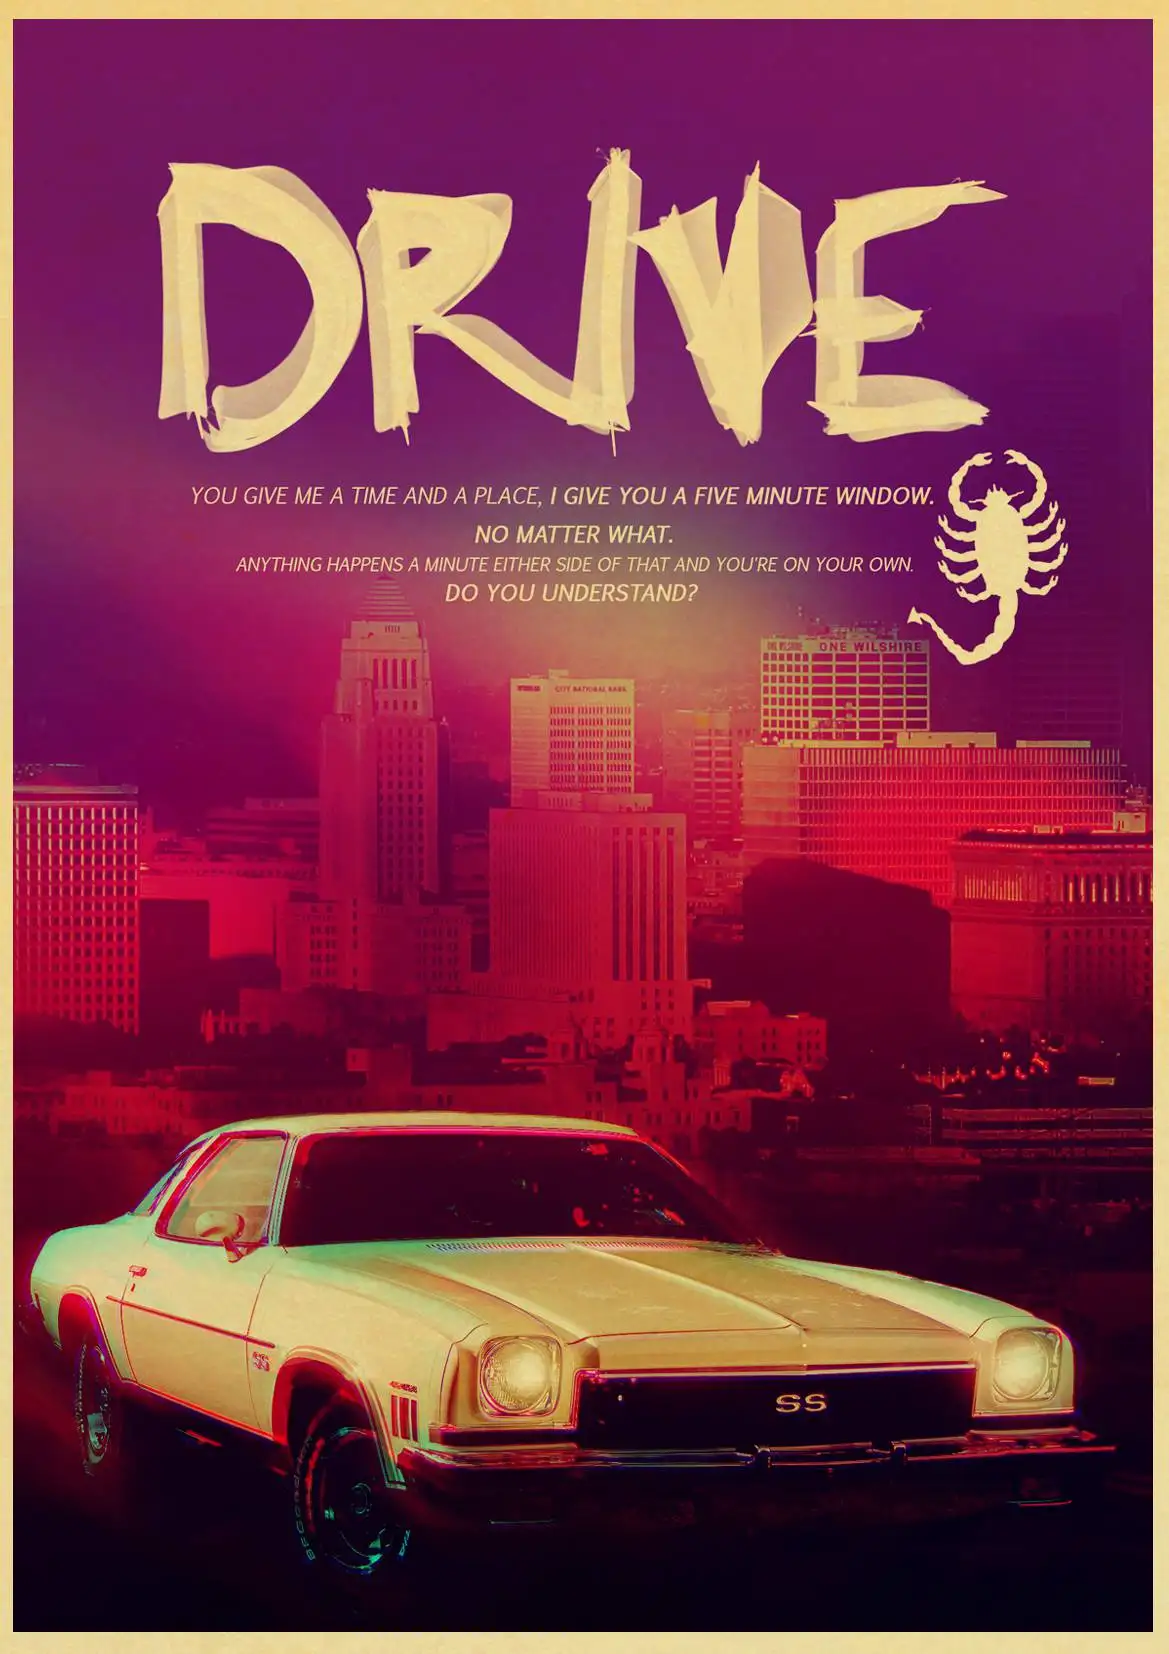 Ryan Gosling Classic Movie Drive Poster Vintage Wall Poster Home Room Study Wall Decor Kraft Paper Wall Pictire/Painting 